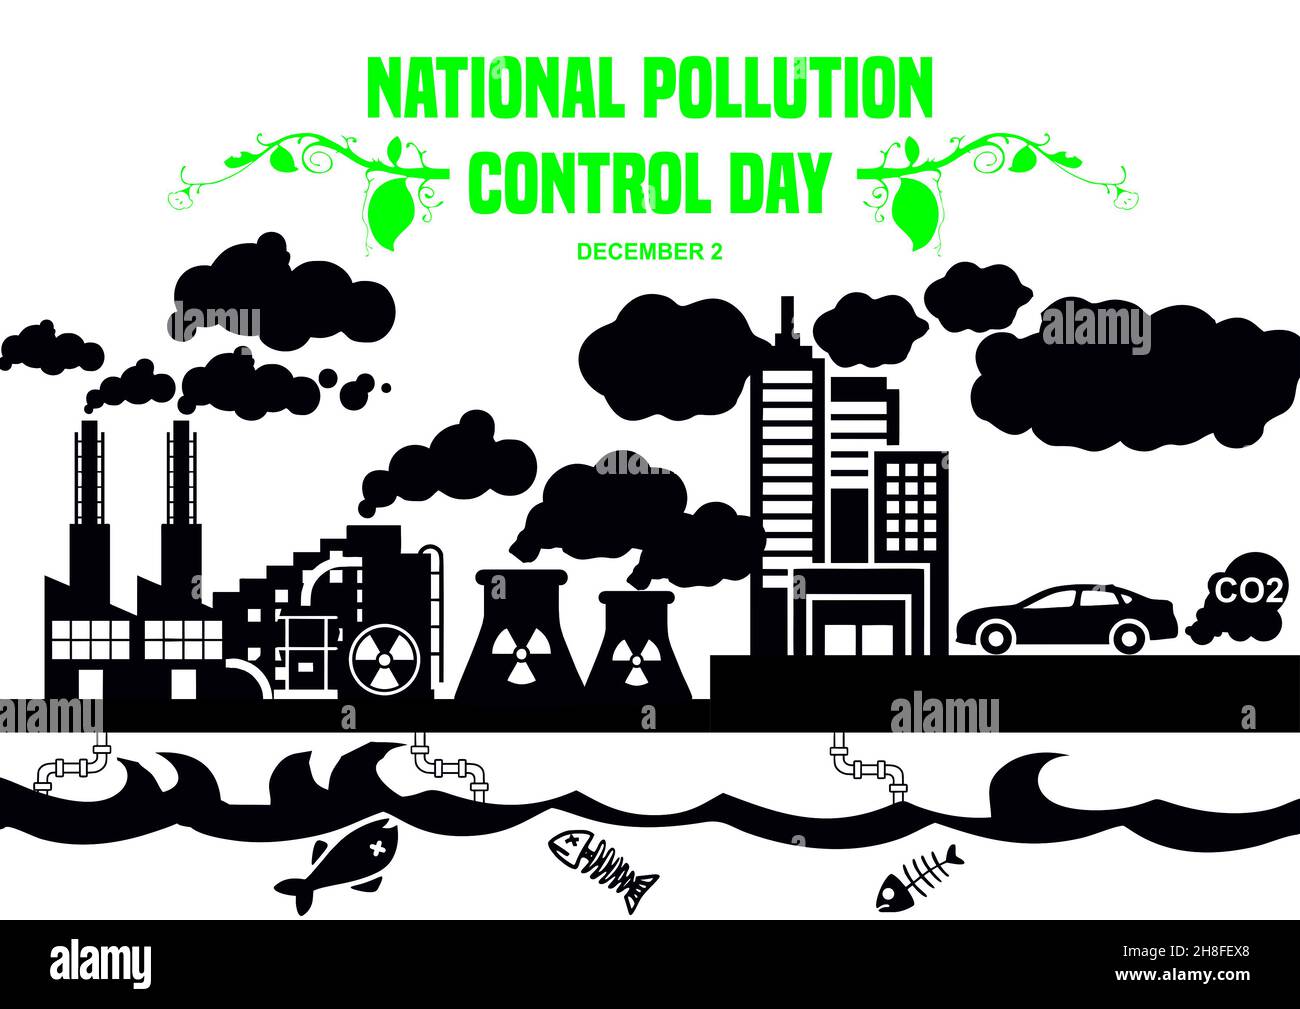 National Pollution Control Day image. India observes this Day on December 2 in memory of people who lost their lives in the Bhopal gas disaster. Stock Photo